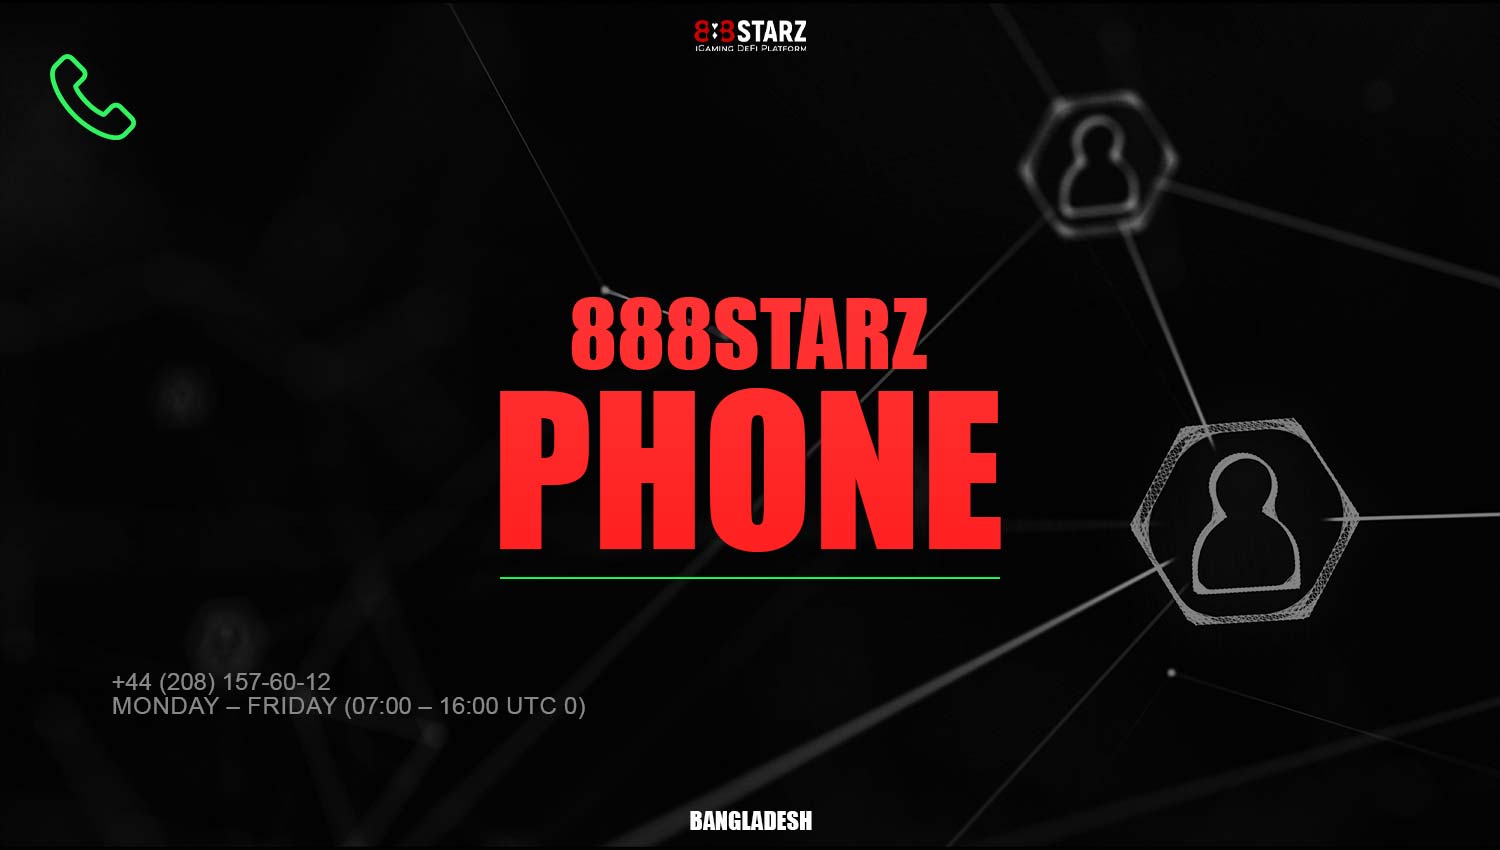 You can contact 888Starz customer support by phone.